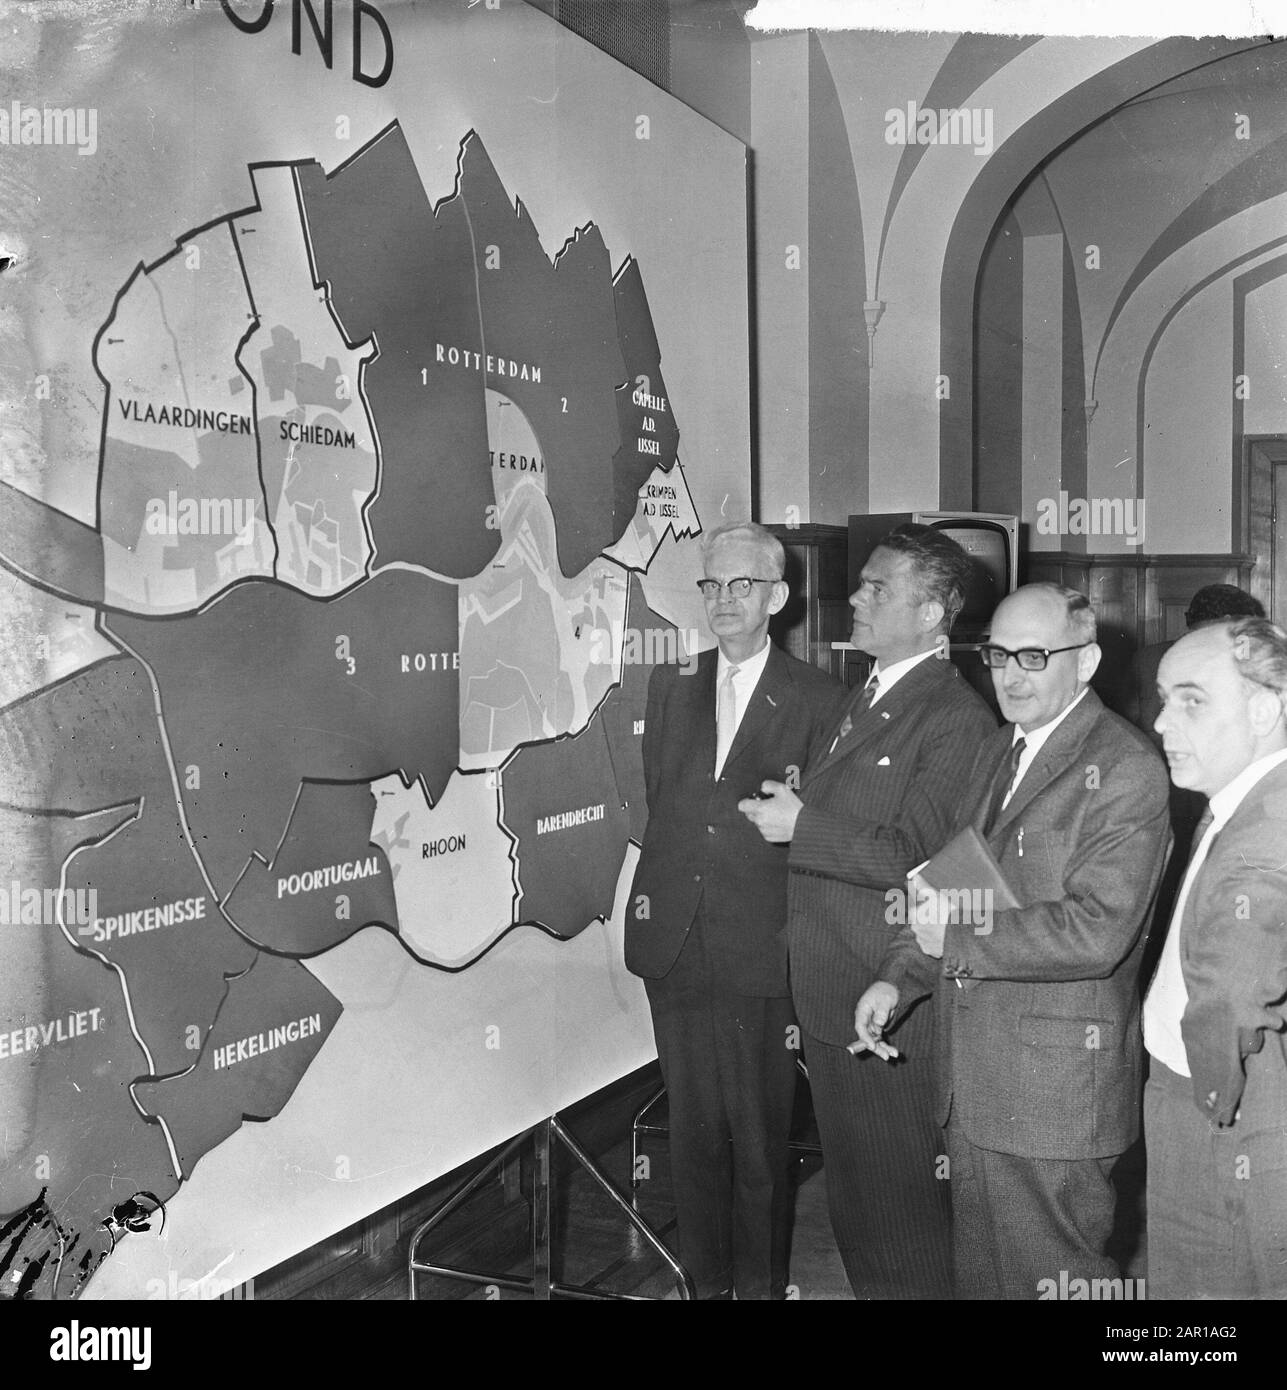 Elections Rijnmond, at City Hall of Rotterdam by l.n.r. alderman Schilthuis, chairman Marijnen, Kleinbloesem (SGP) and De Vos (KVP) for map of the Date: June 2, 1965 Location: Rotterdam, Zuid-Holland Keywords: ELECTIONS, city halls, chairmen Personal name: De Vos Stock Photo